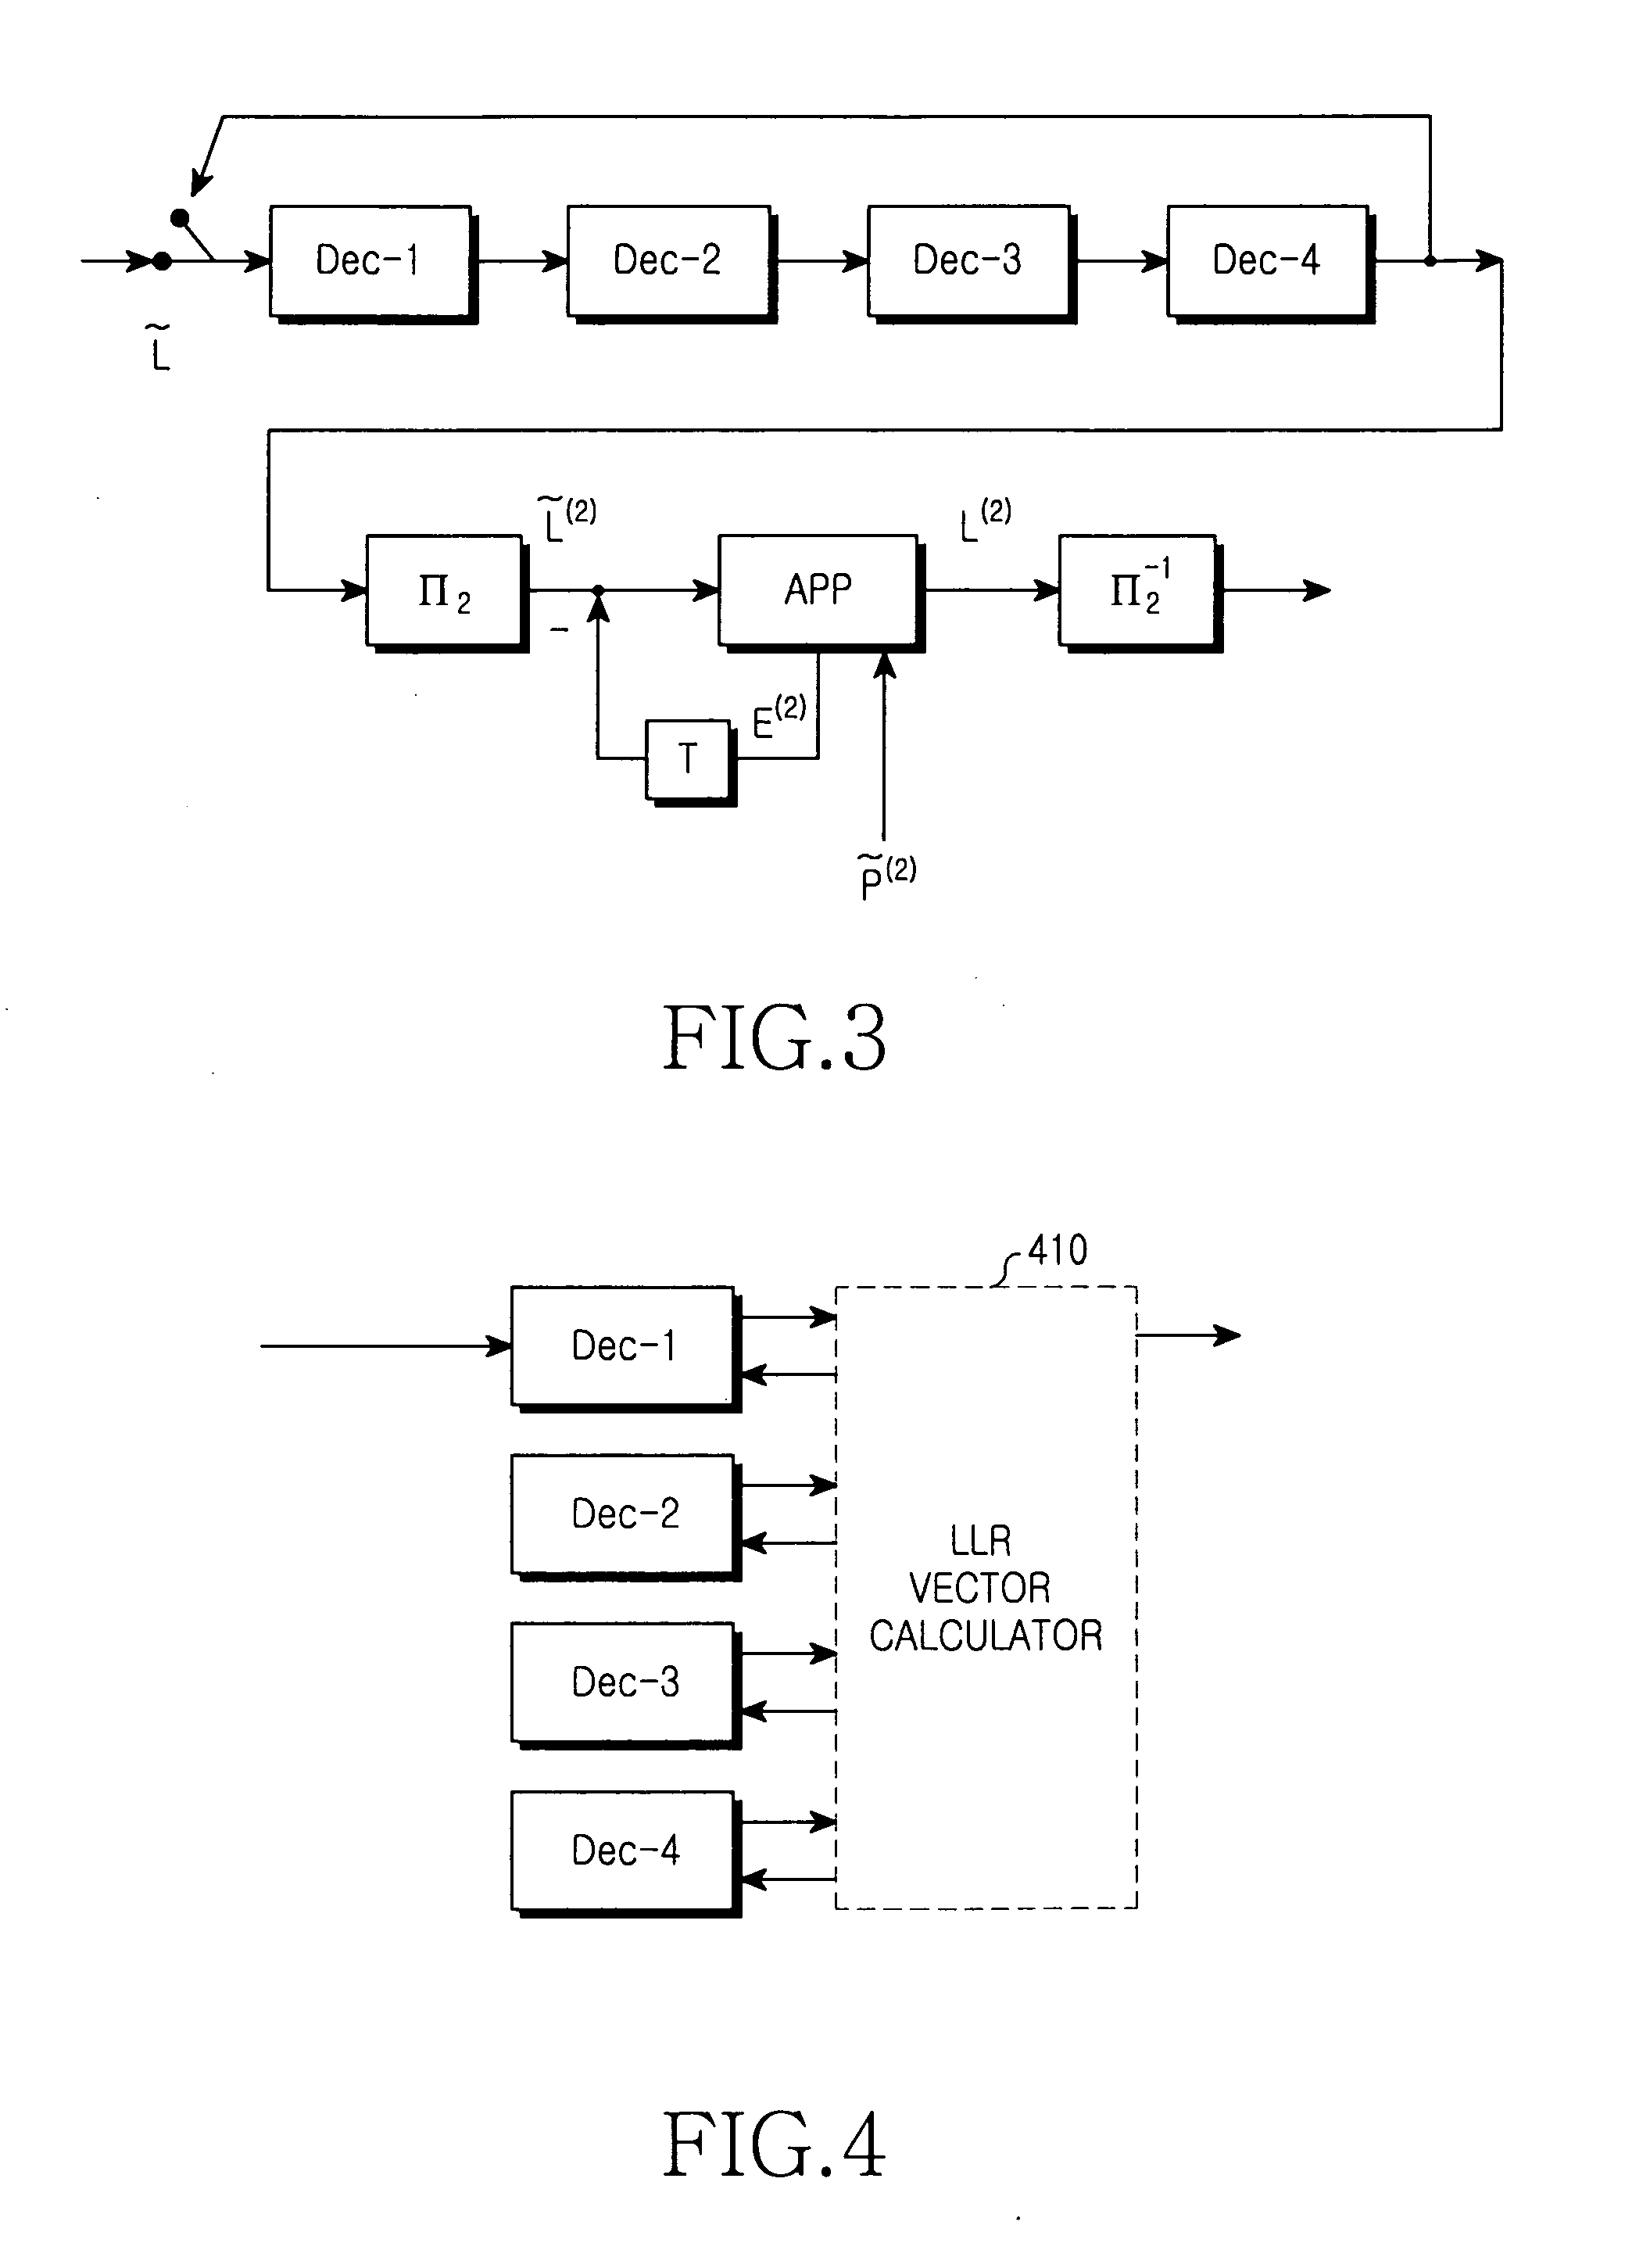 Apparatus and method for generating low density parity check code using zigzag code in a communication system